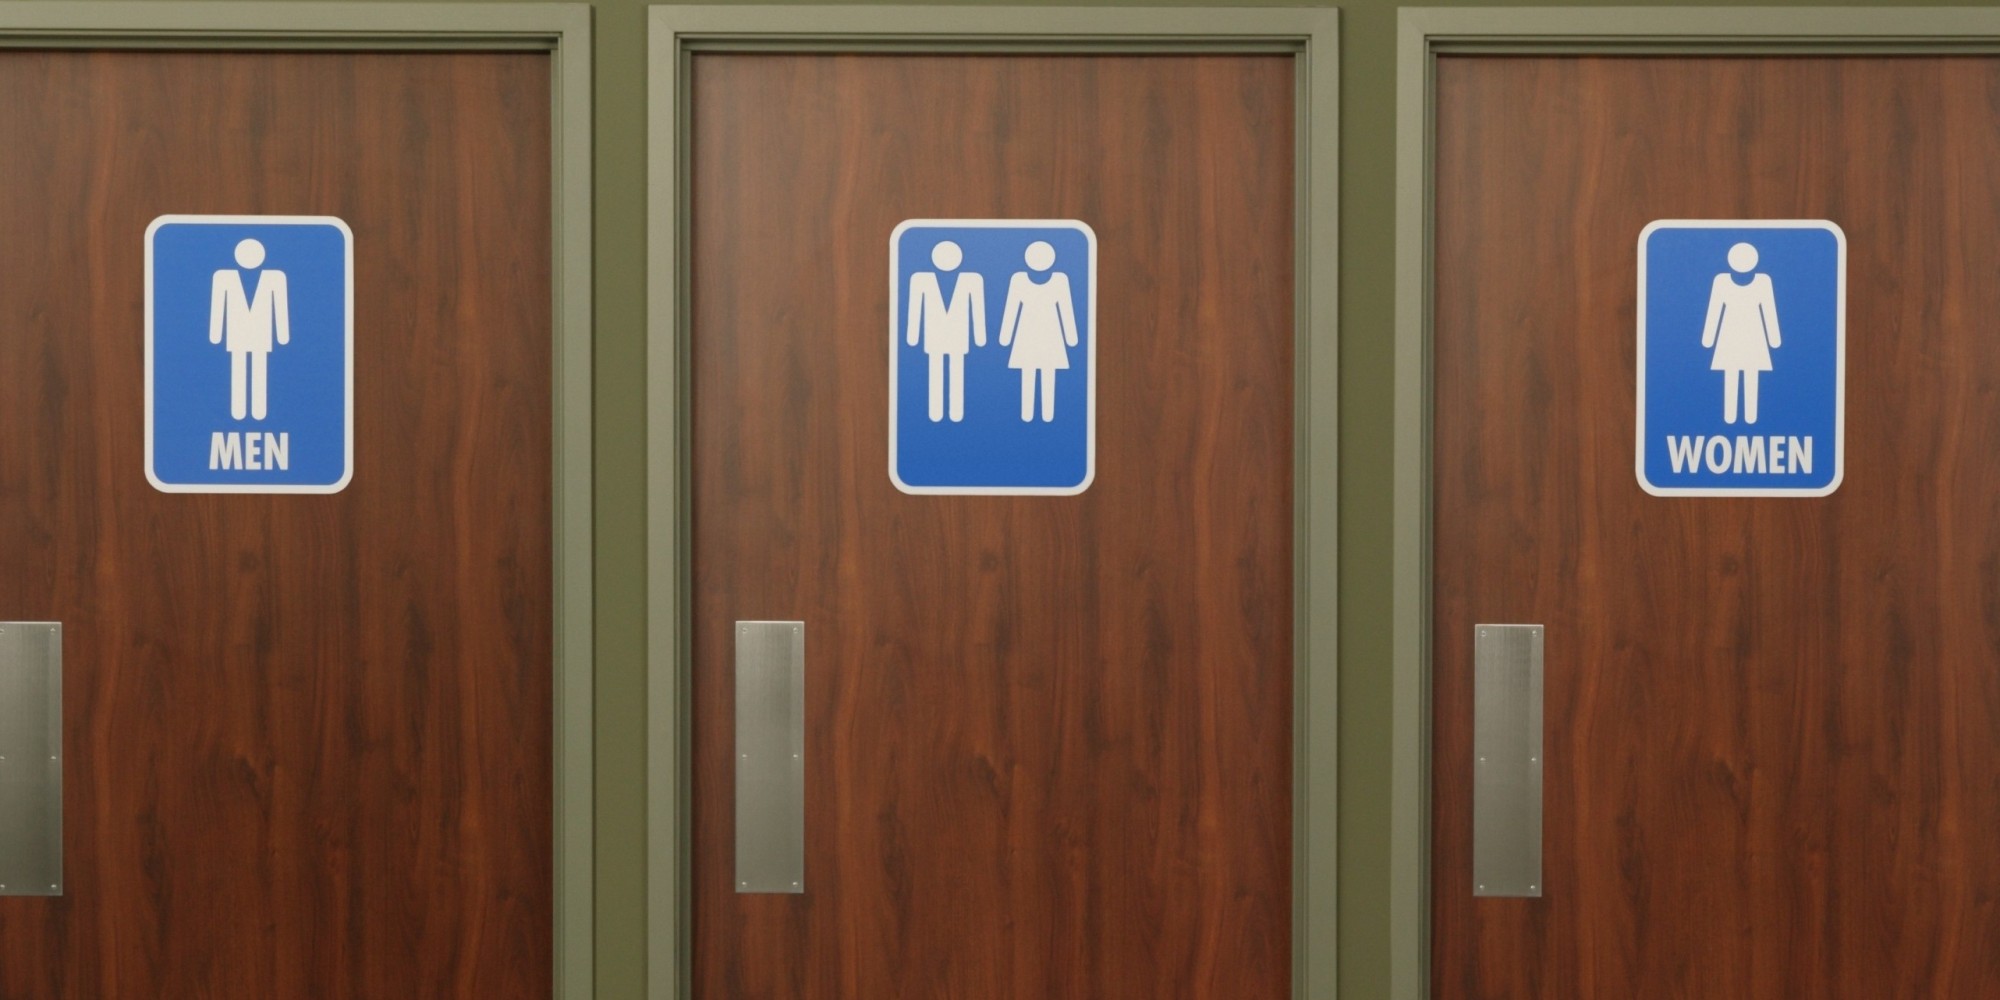 Transgender Rights and Public Bathrooms